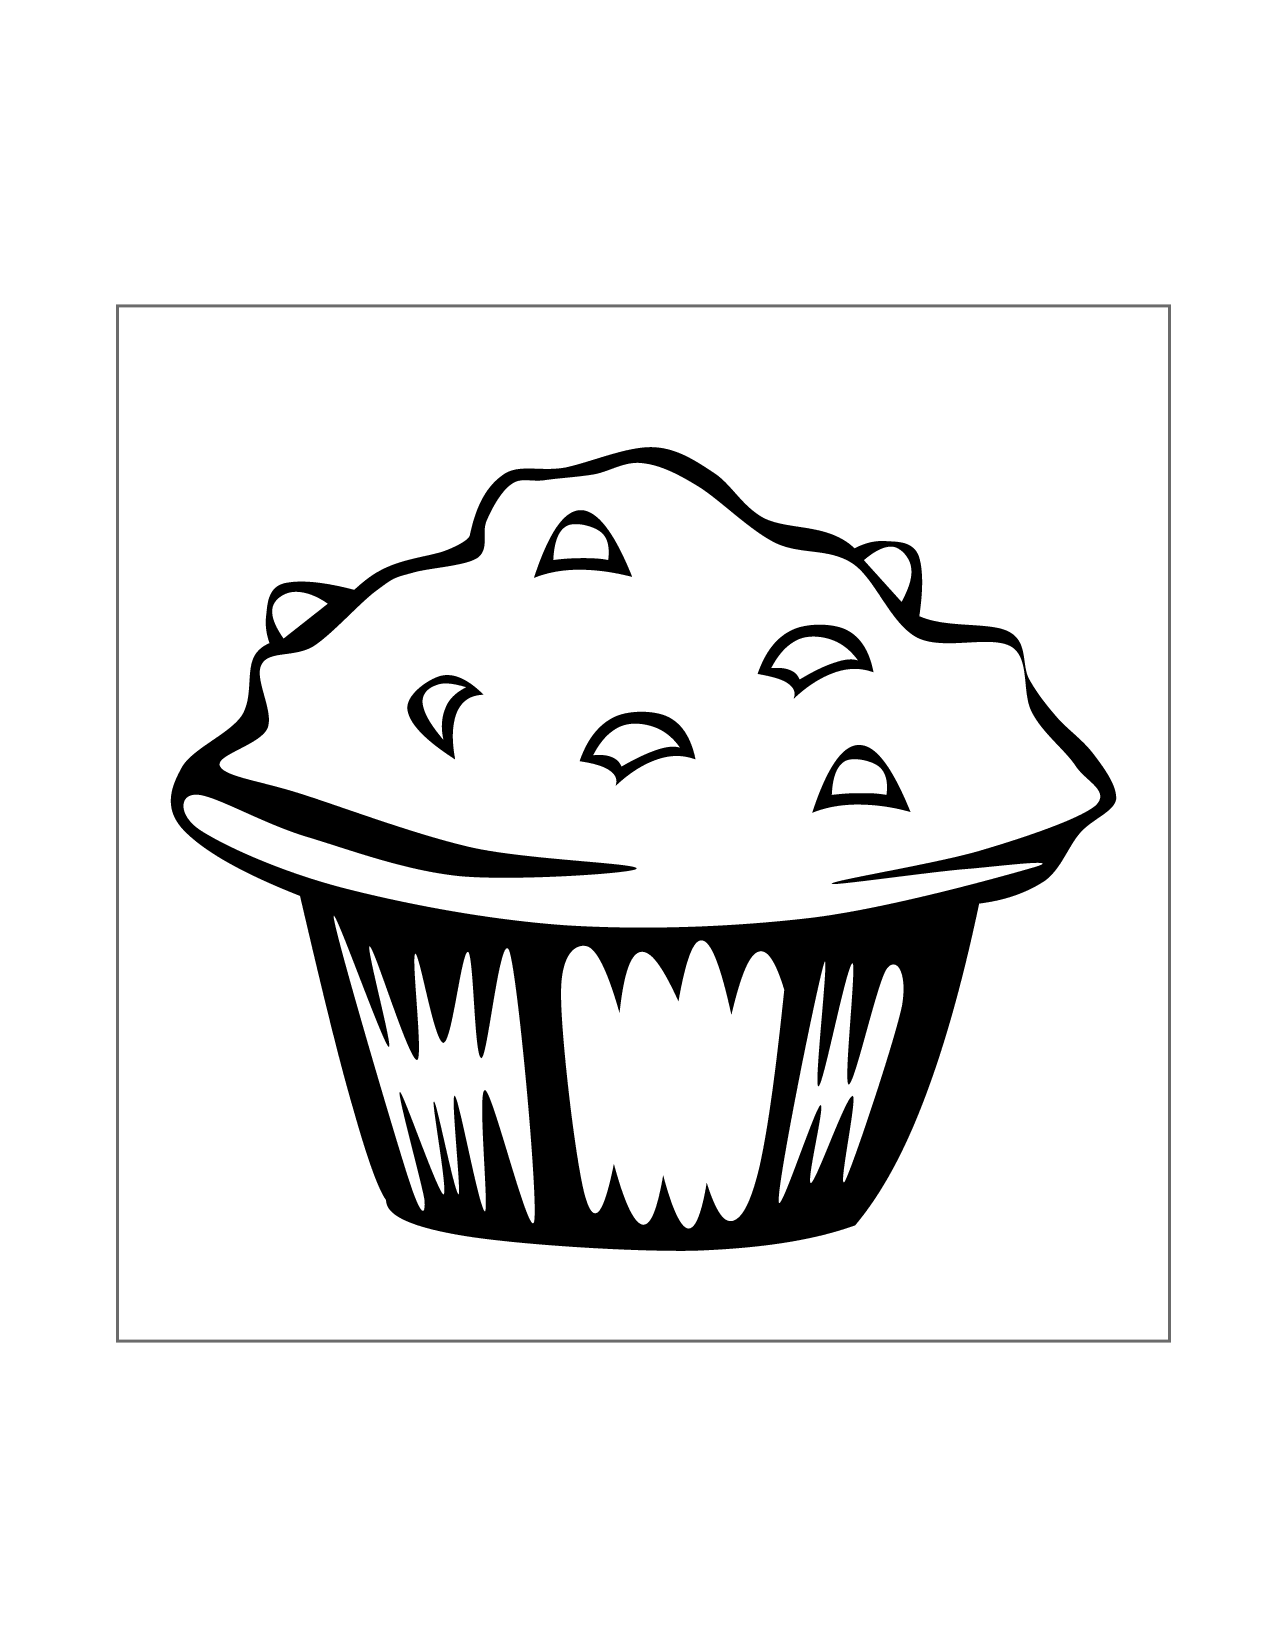 Breakfast Muffin Coloring Page